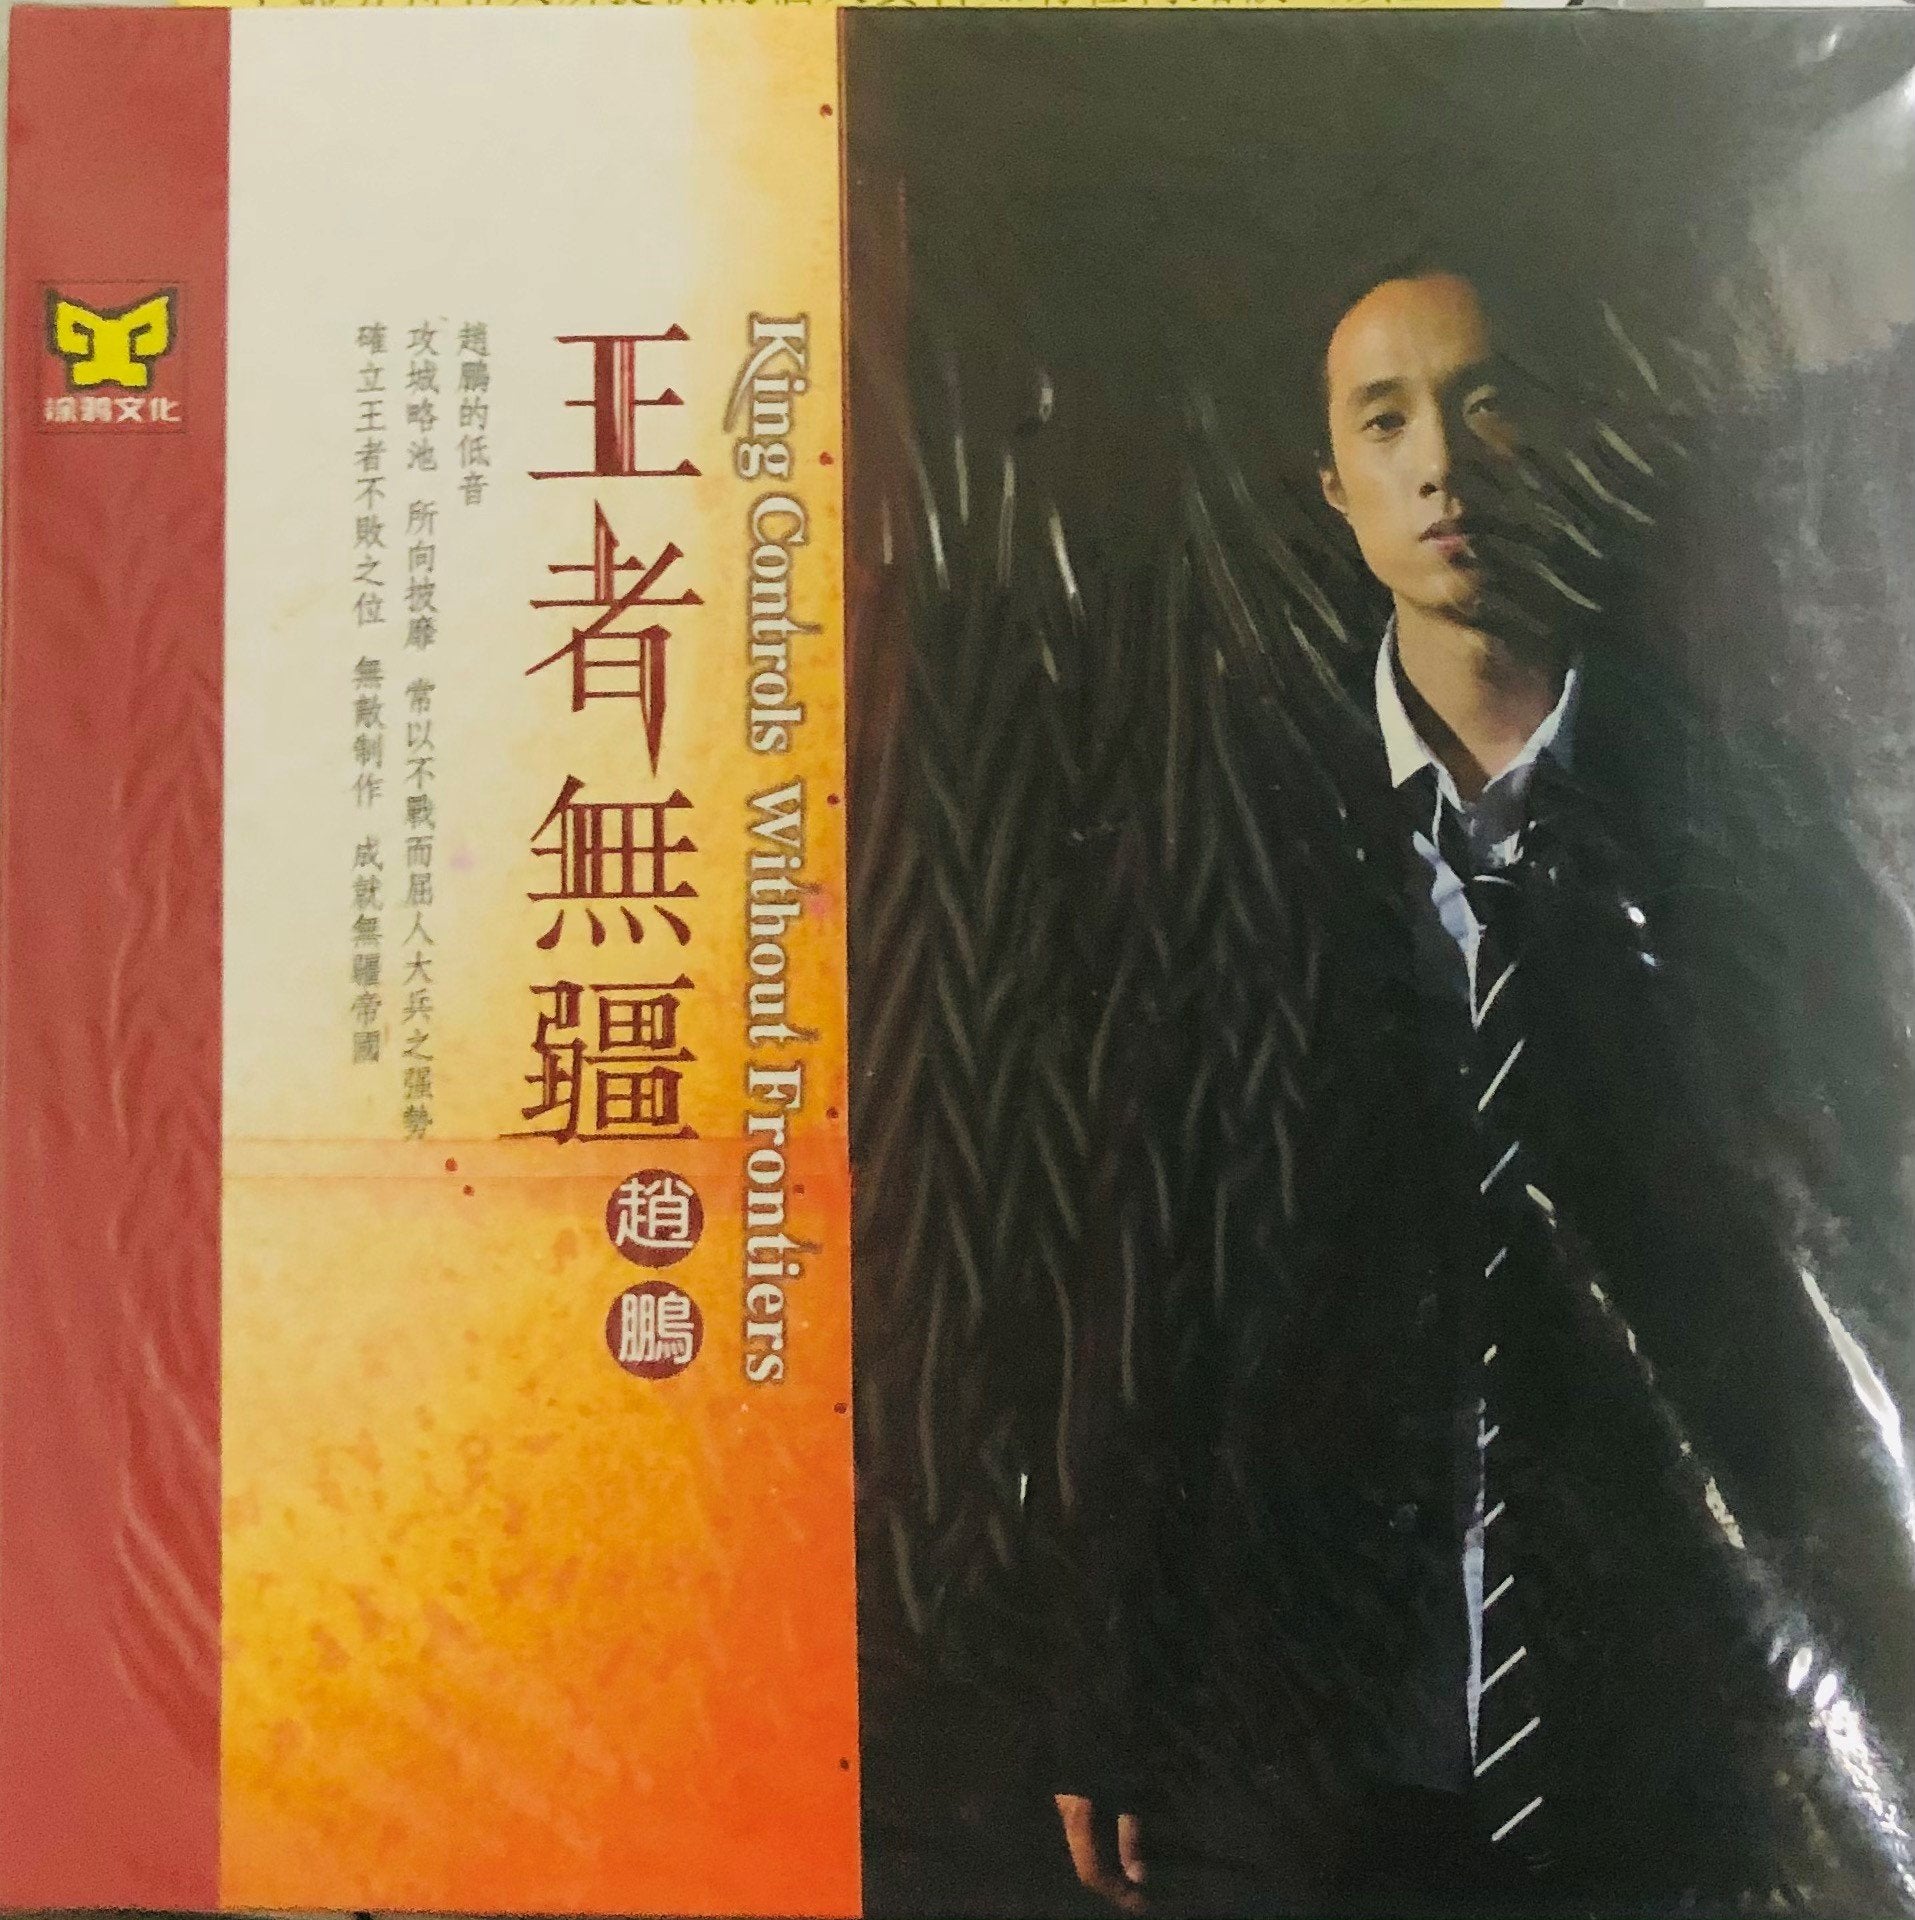 ZHAO PENG - 趙鵬 KING CONTROLS WITHOUT FRONTIERS 王者無疆 (CD)